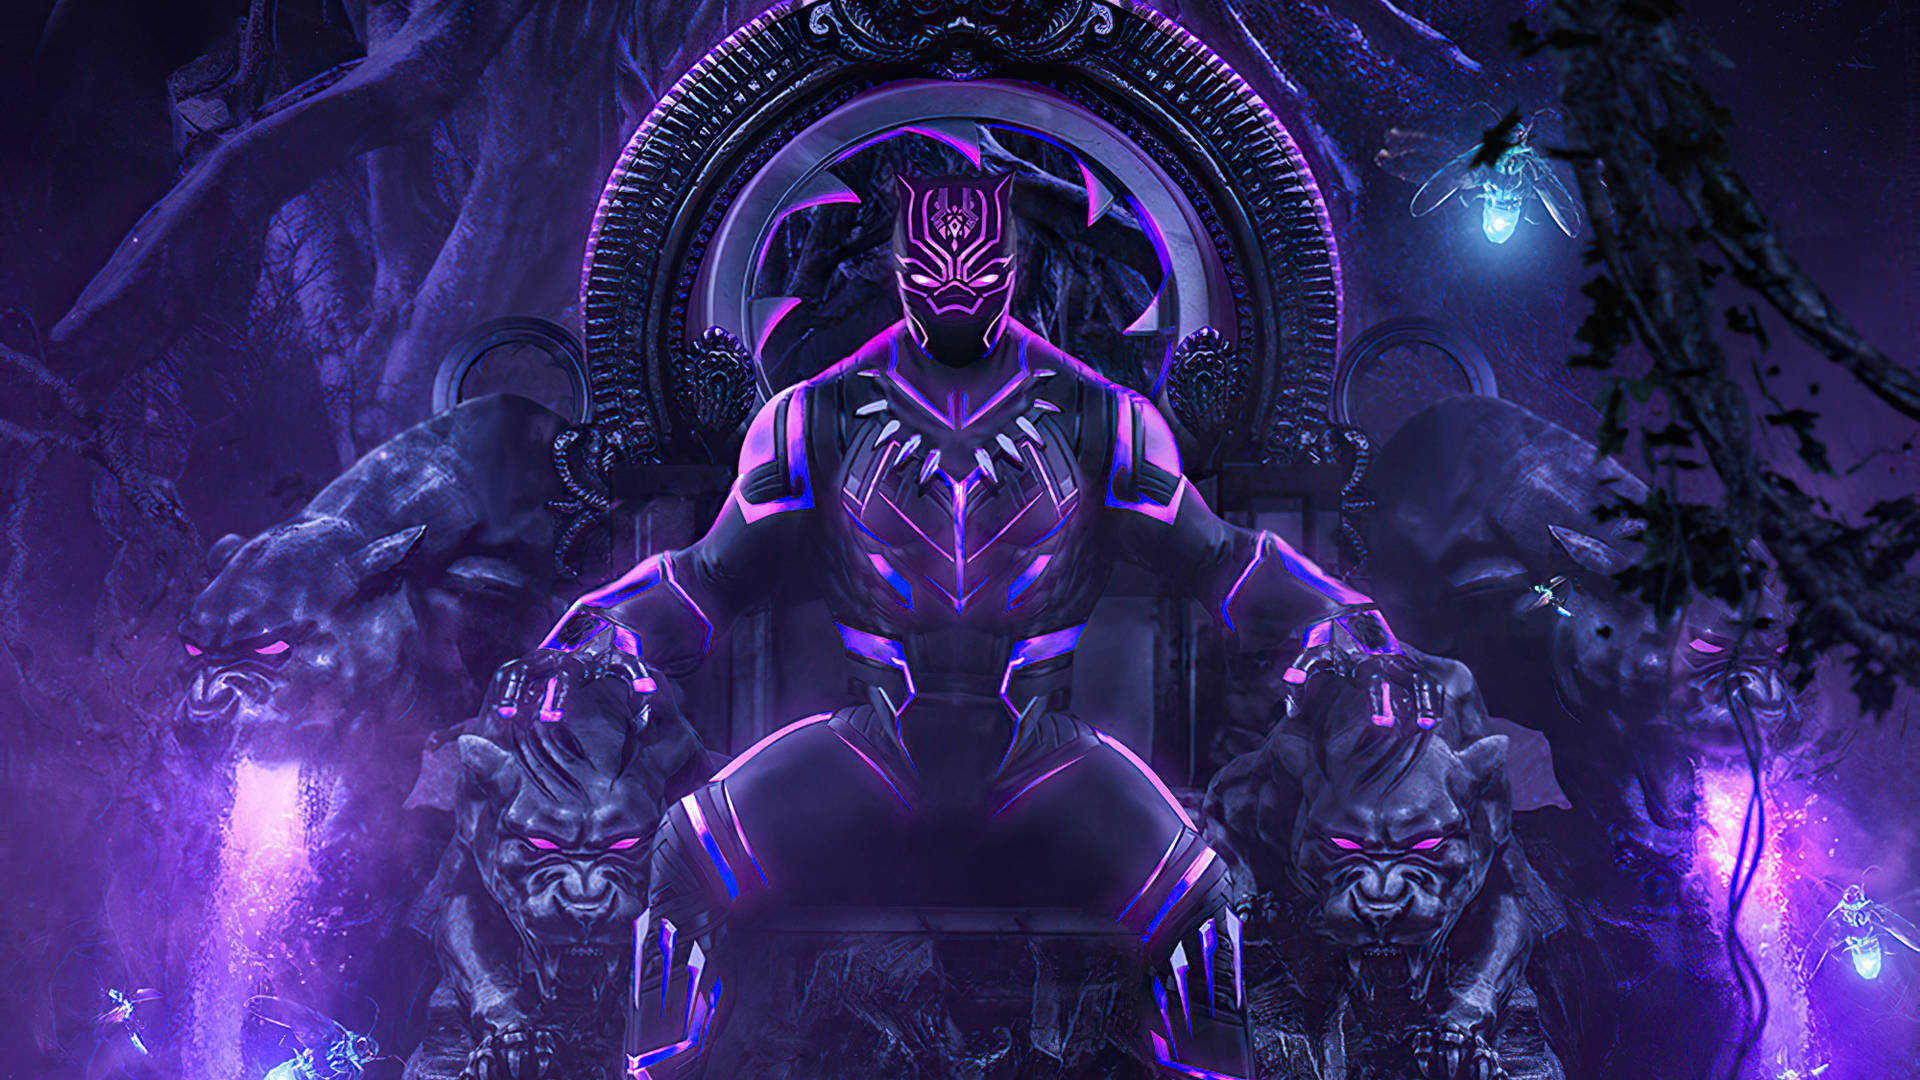 Download Black Panther In Throne Wallpaper 